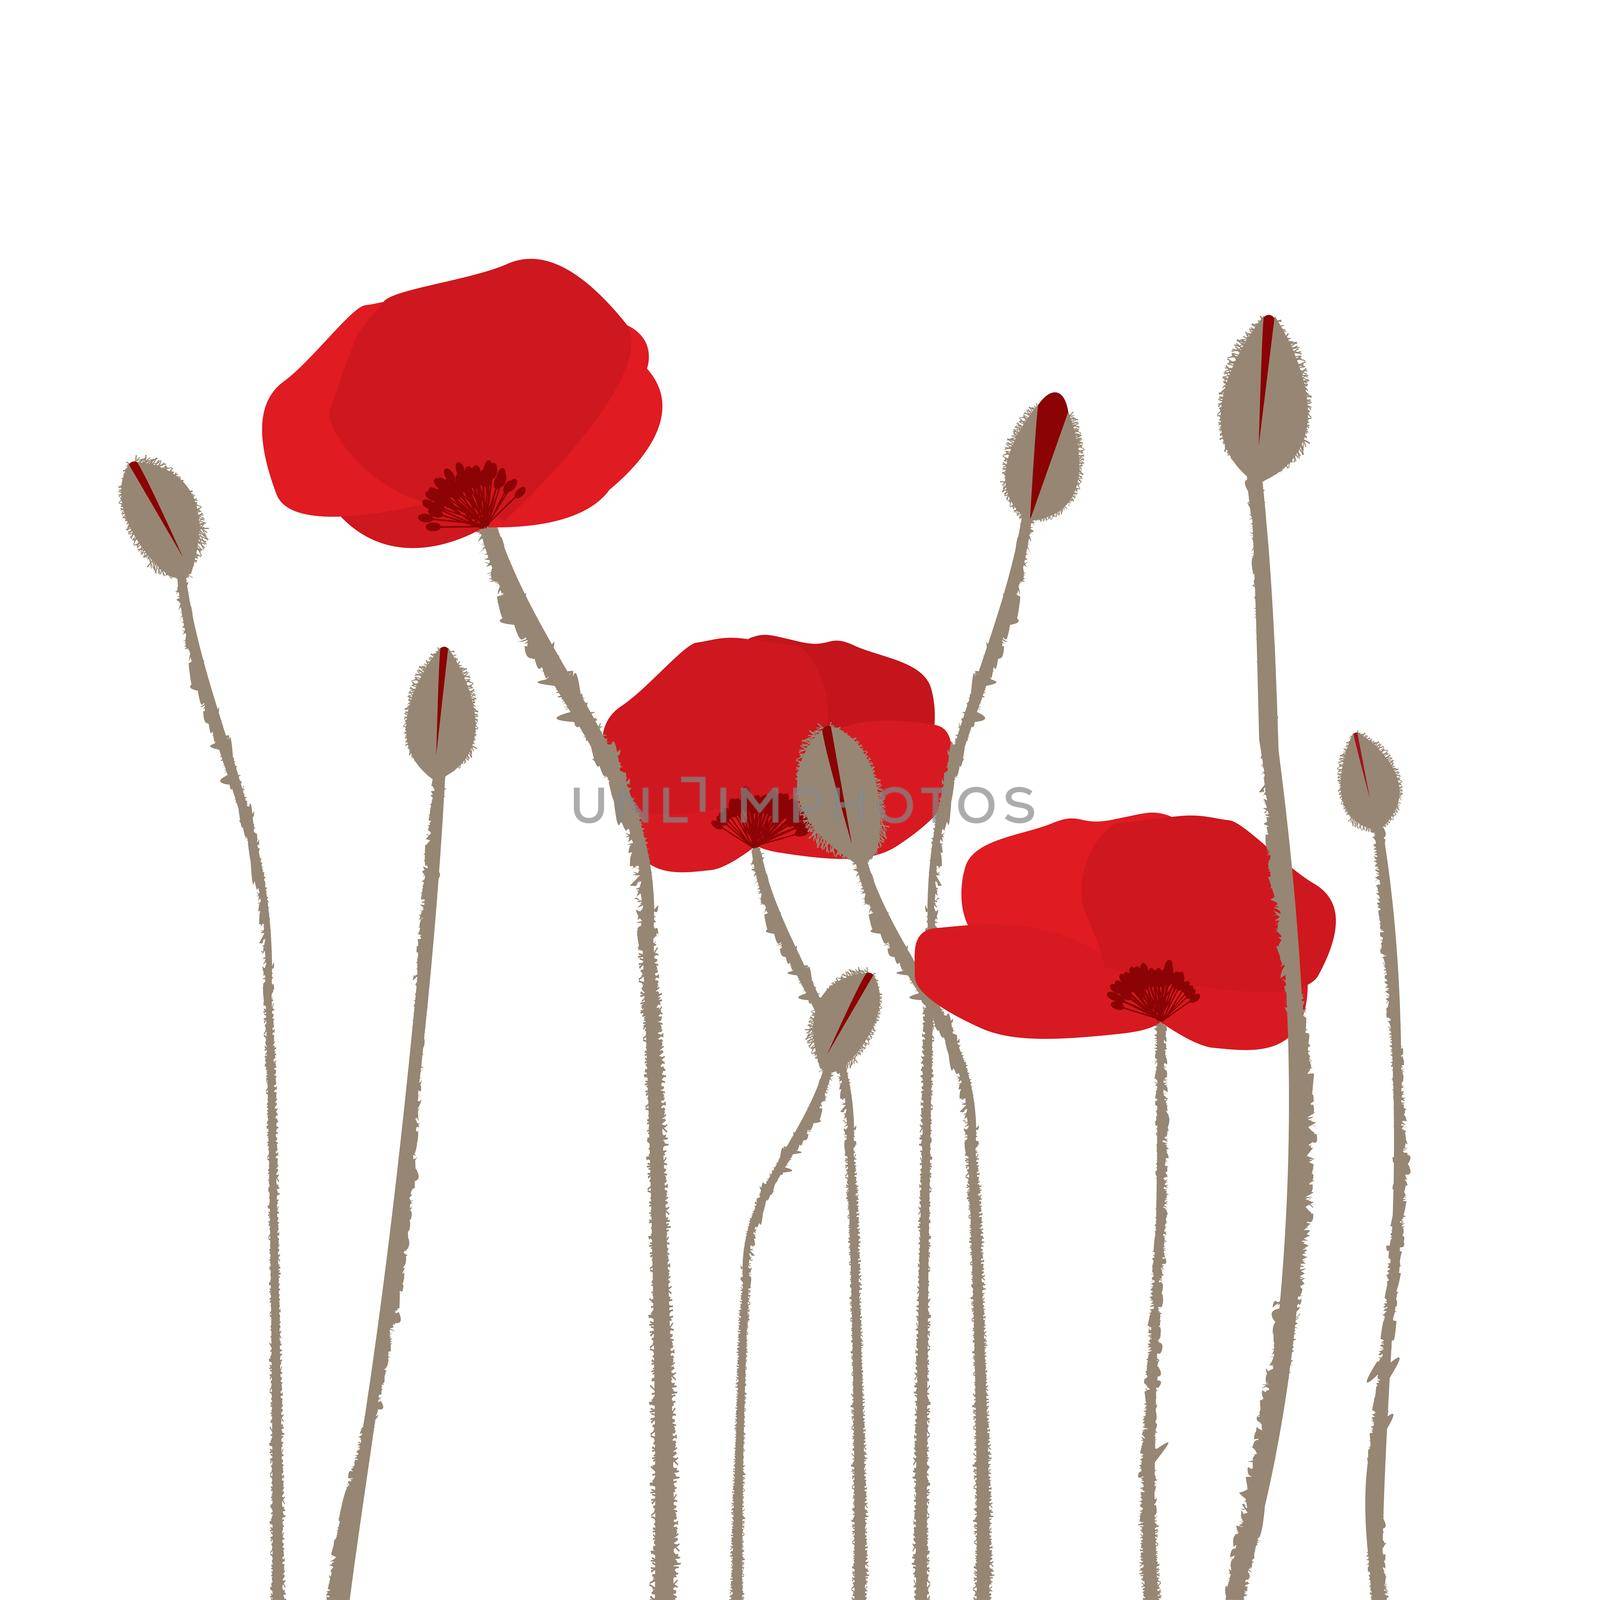 Hand drawn stylized poppies on white background by hibrida13